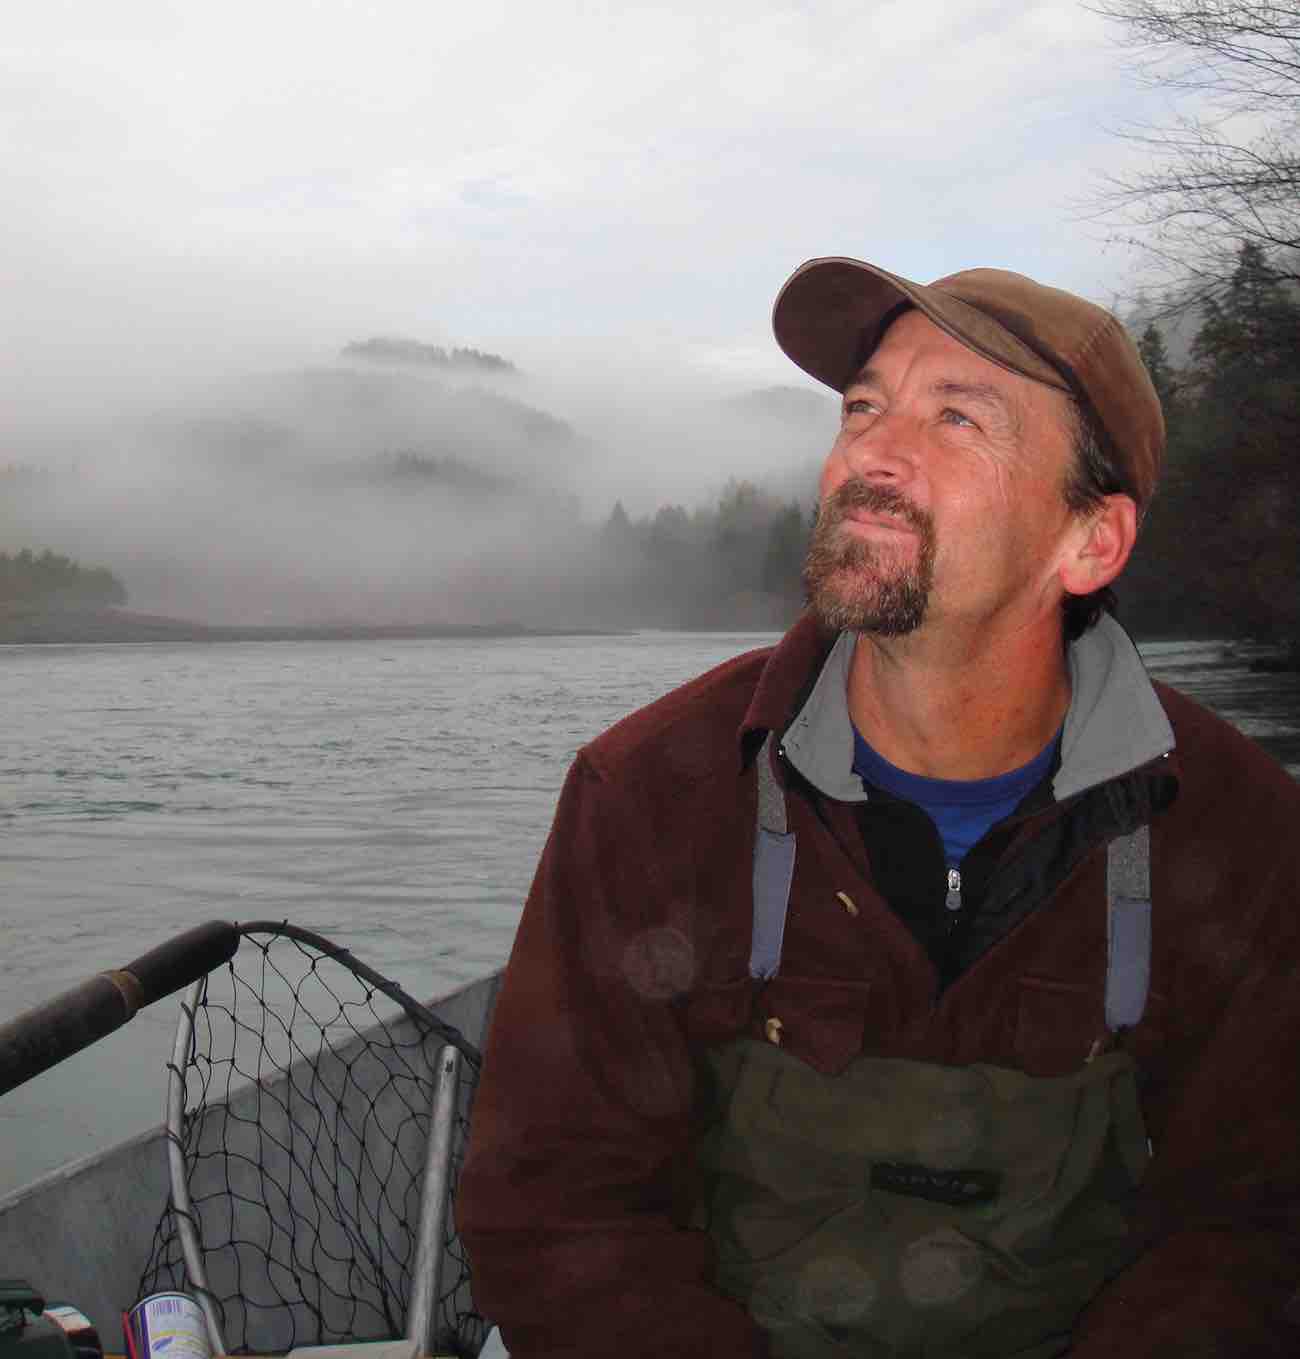 Rogue river fishing guide enjoying a morning on the Elk river from the comfort of his drift boat.